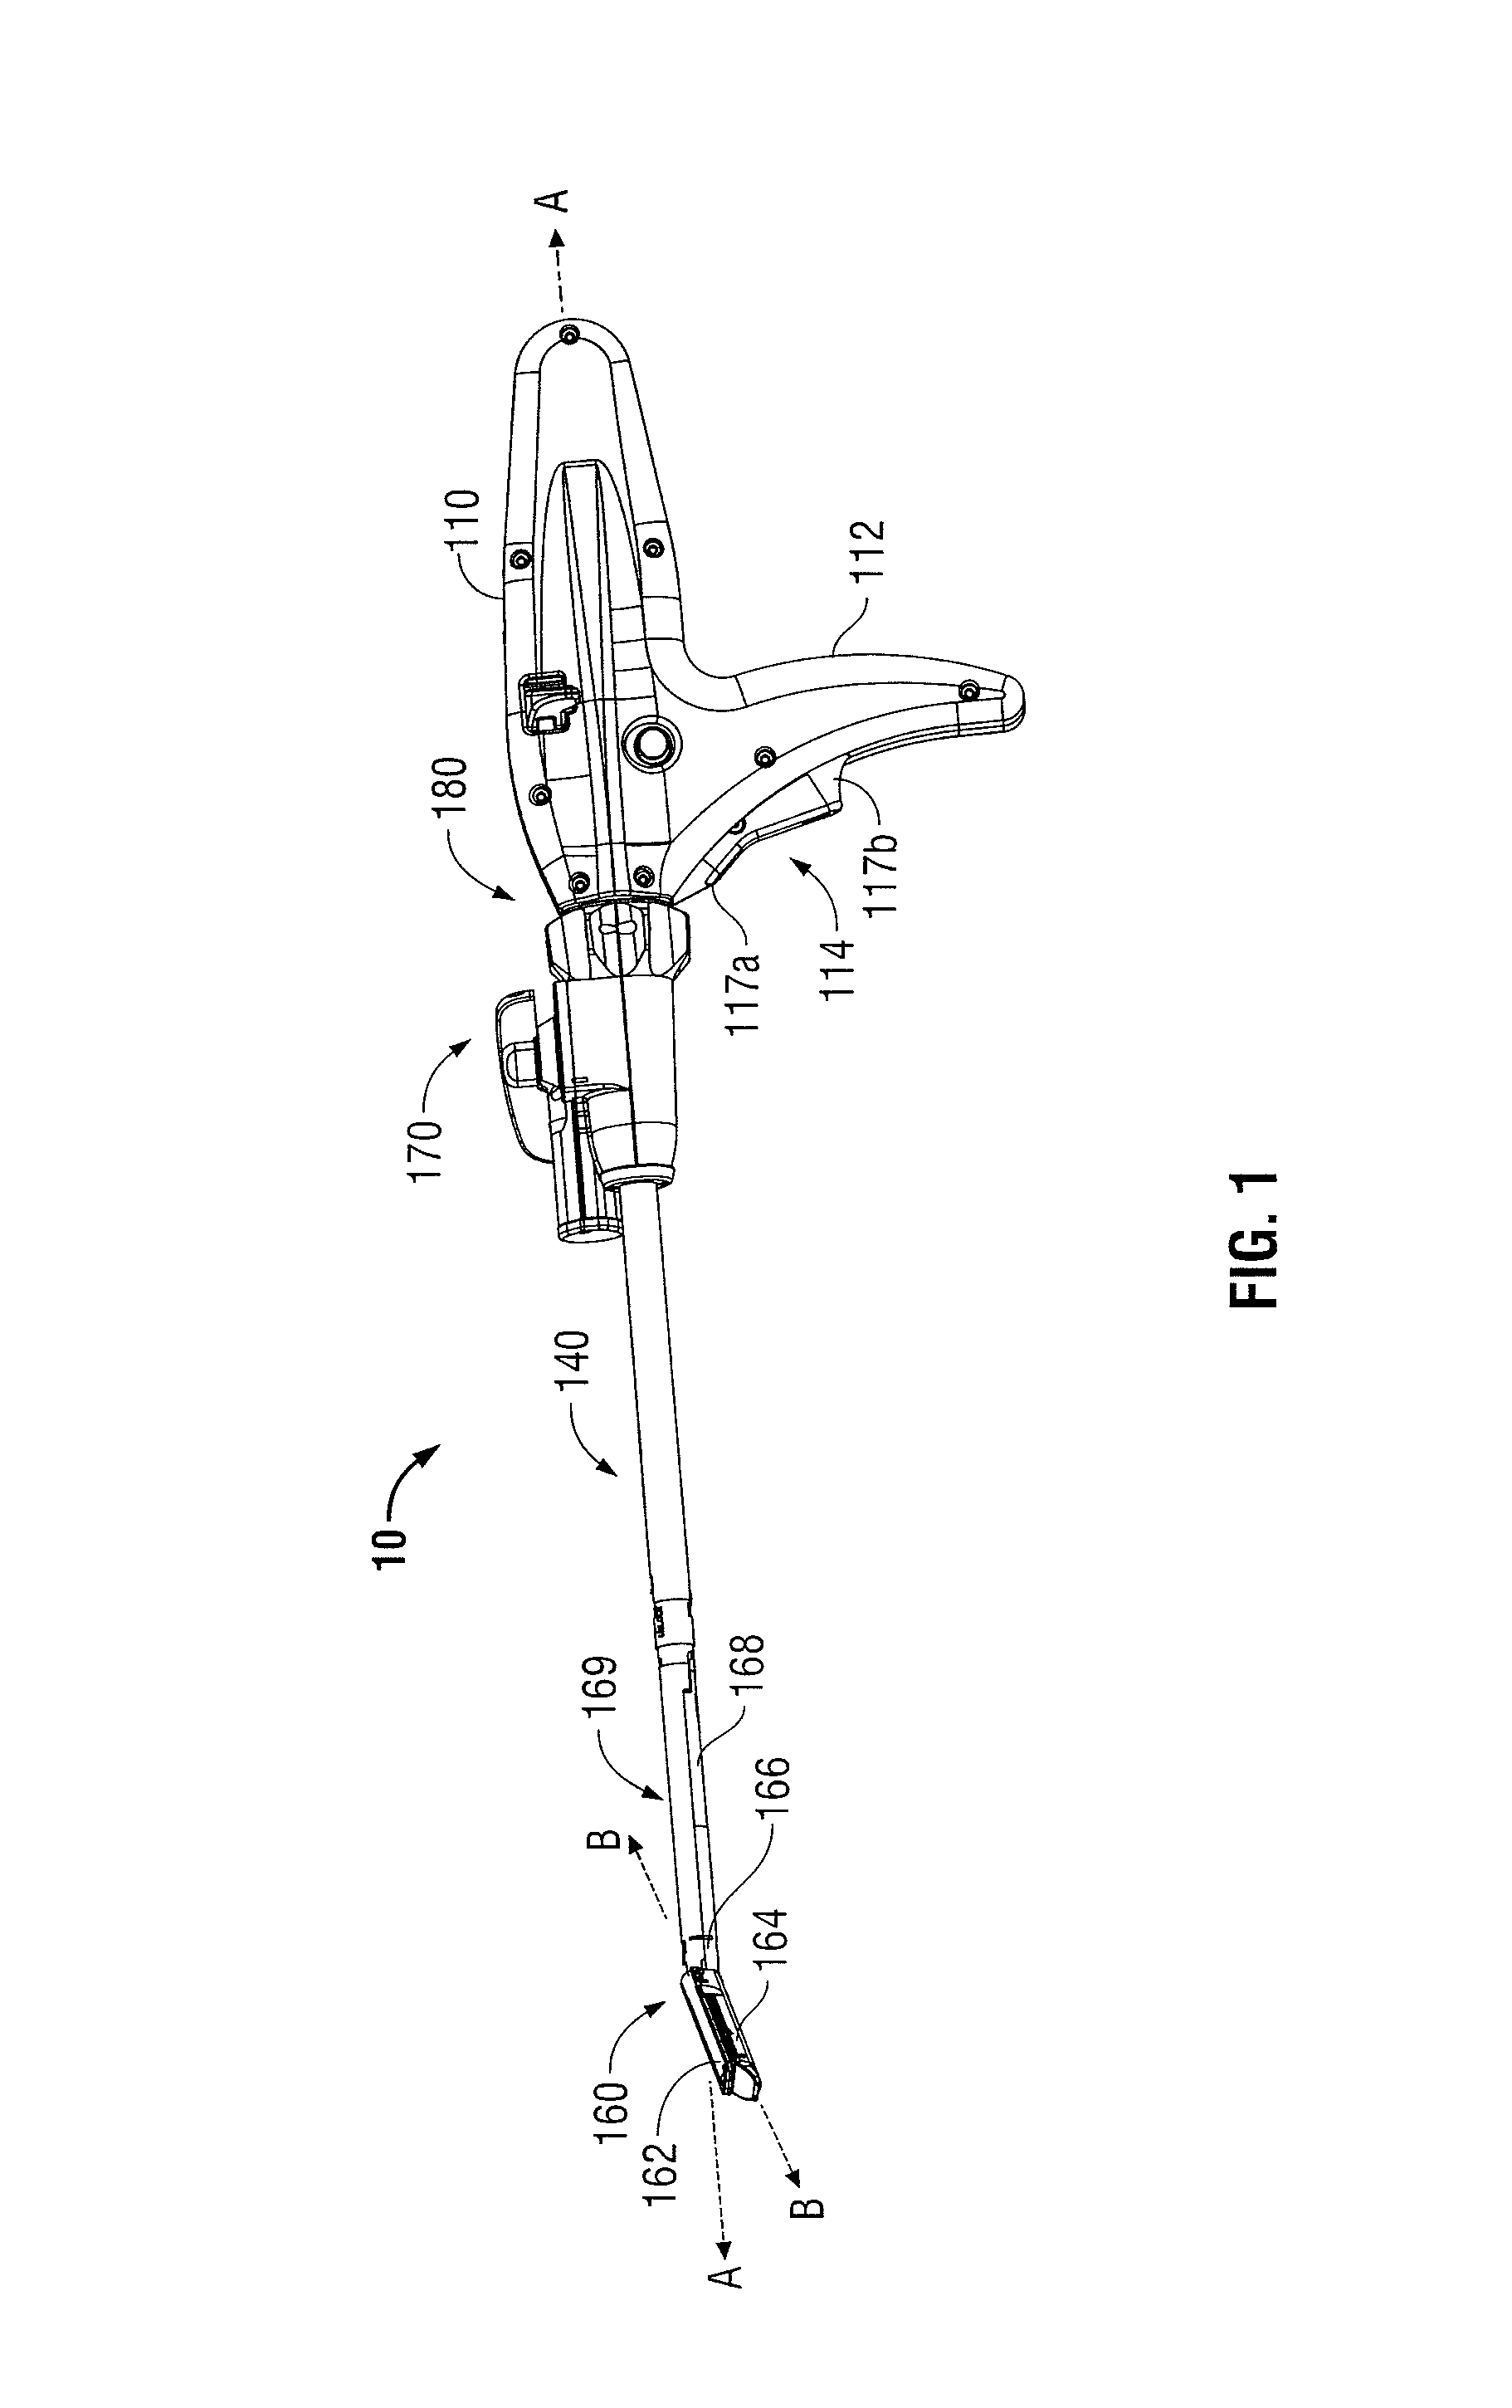 System and method for non-contact electronic articulation sensing